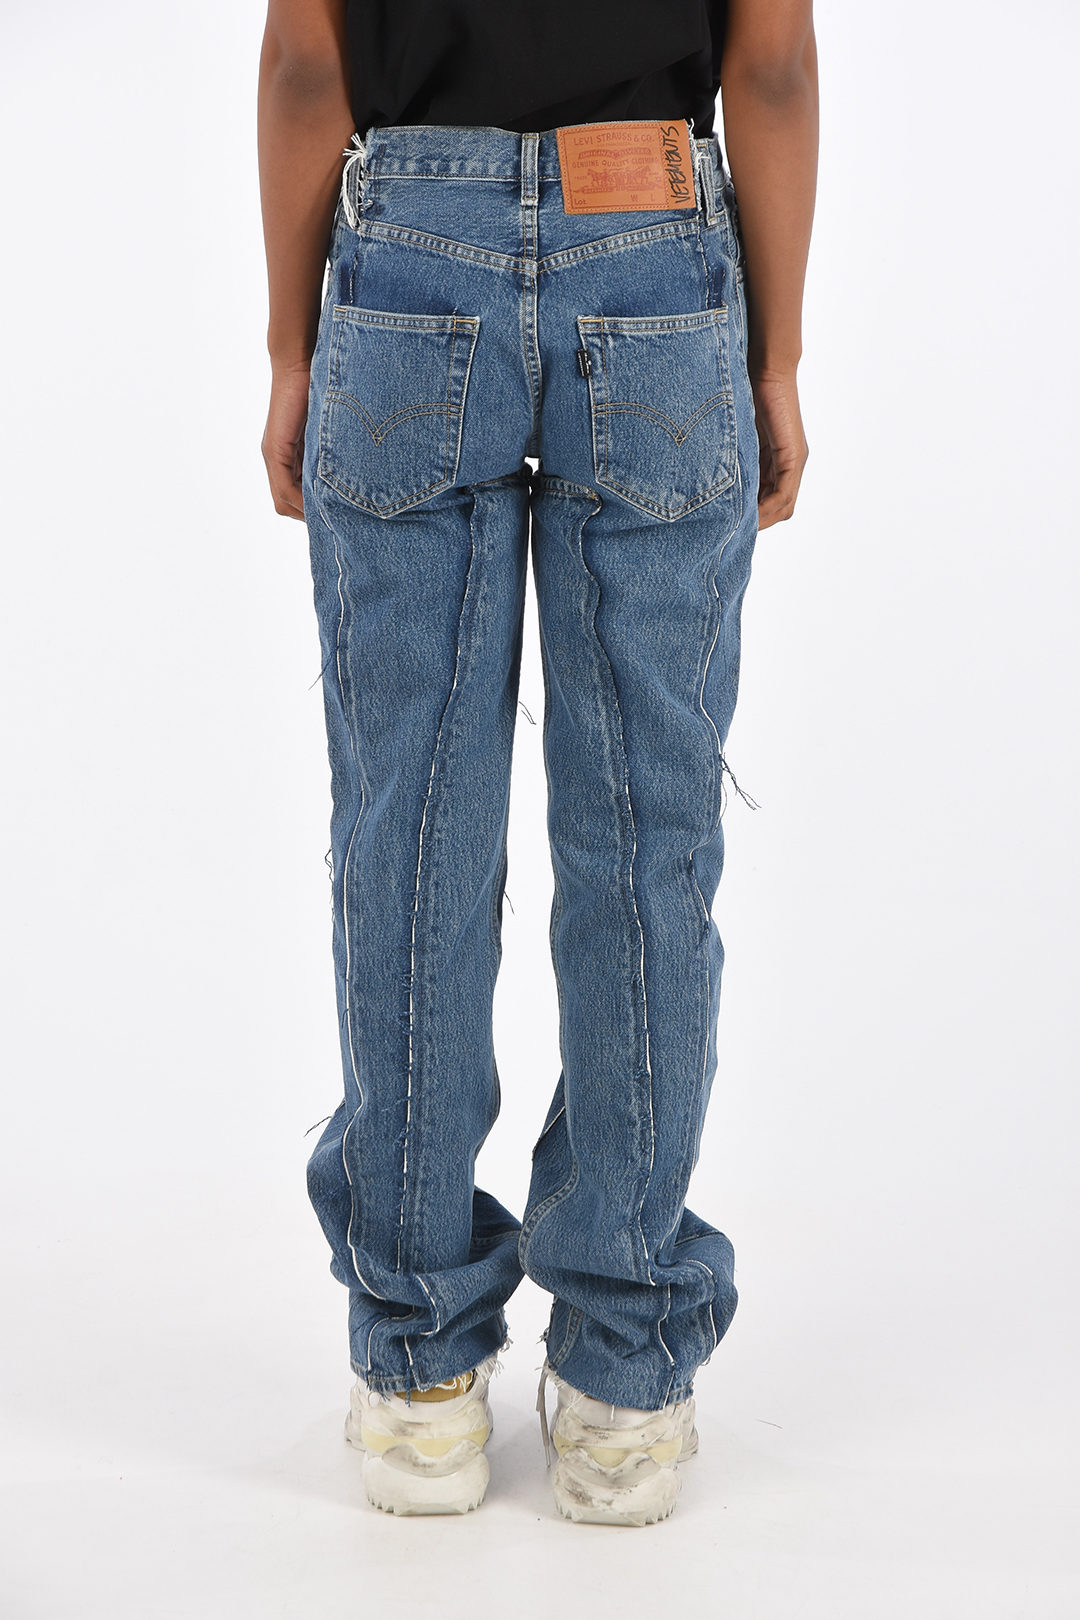 Vetements LEVI'S Frayed High Waist Jeans women - Glamood Outlet